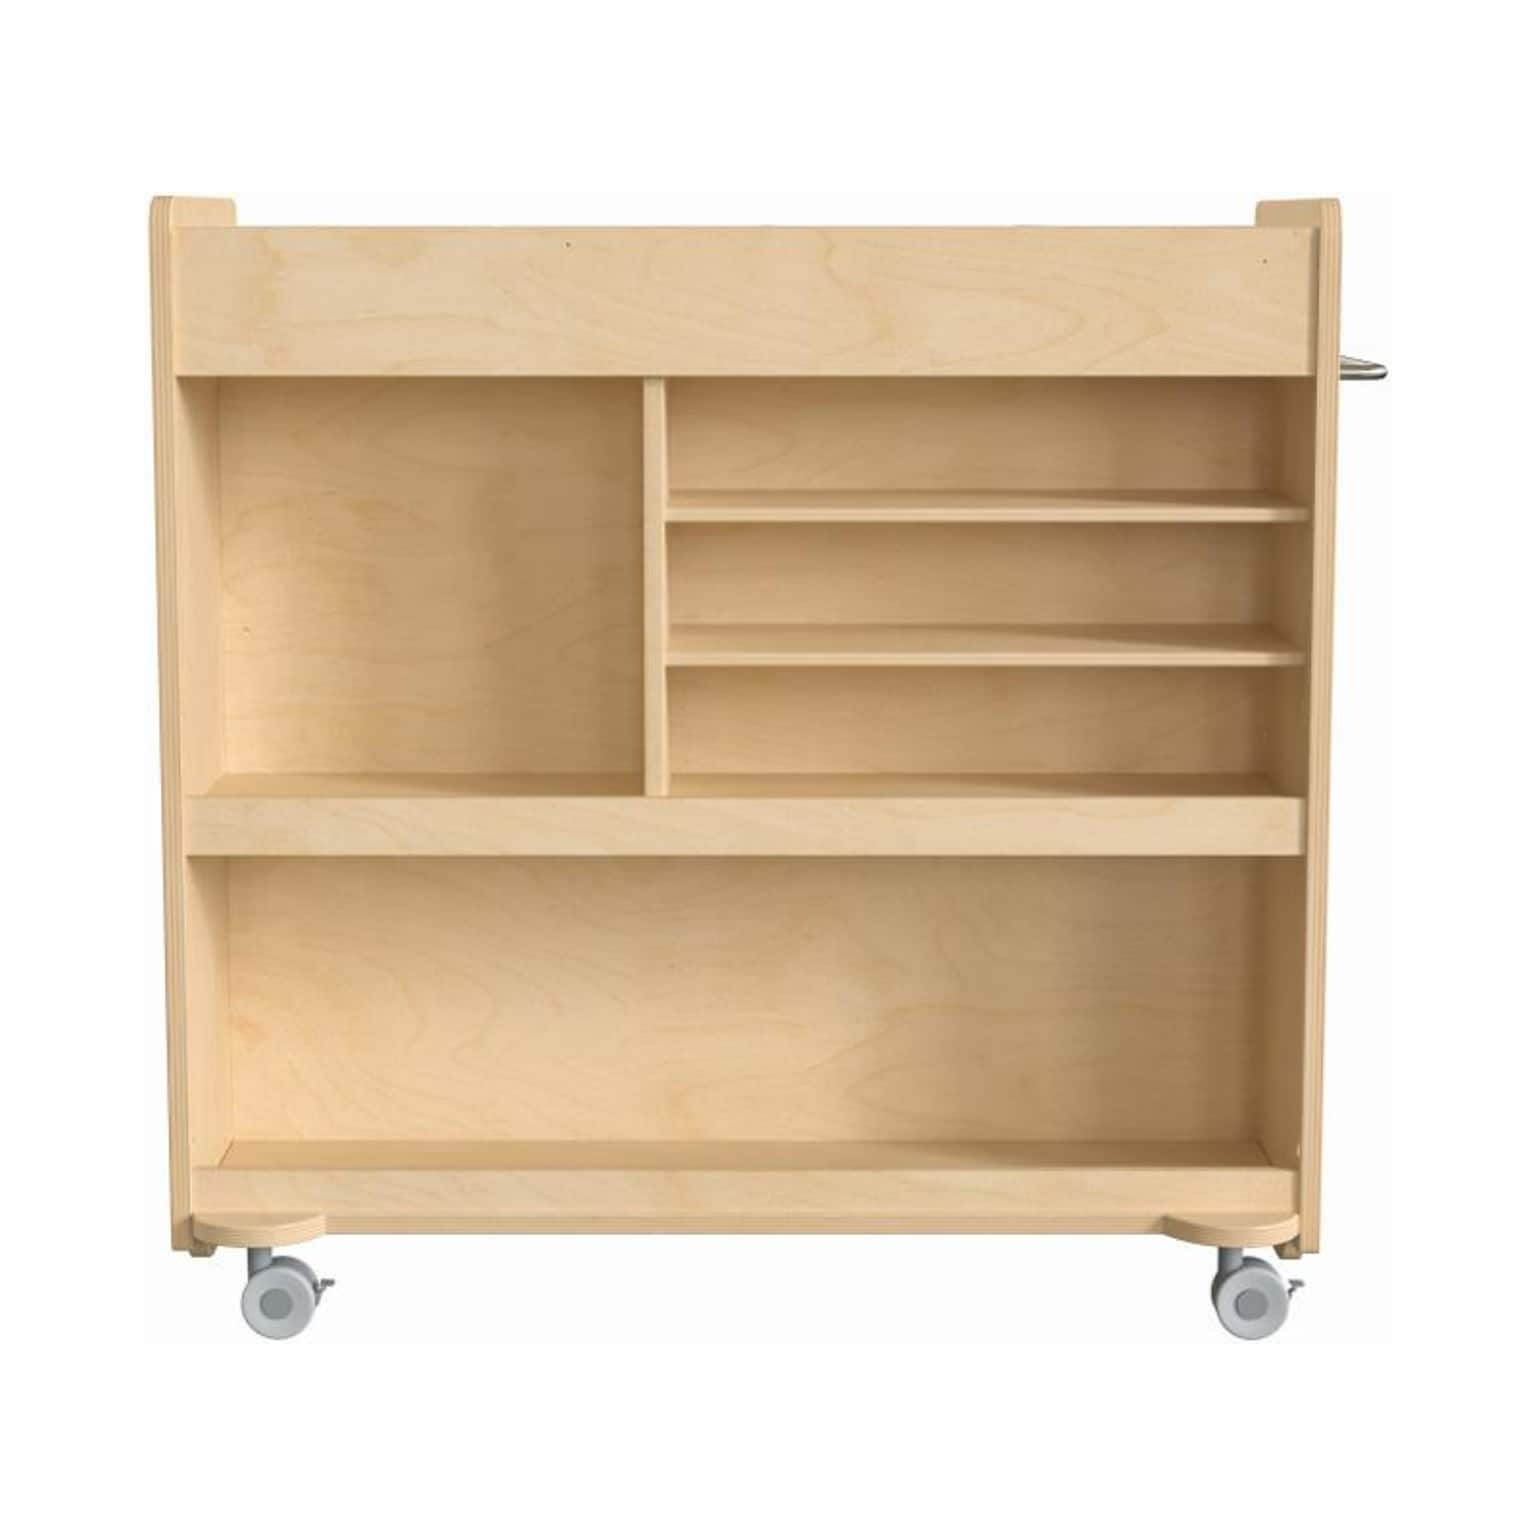 Flash Furniture Bright Beginnings Mobile 9-Section Storage Cart, 31.75H x 33W x 15.75D, Natural Birch Plywood